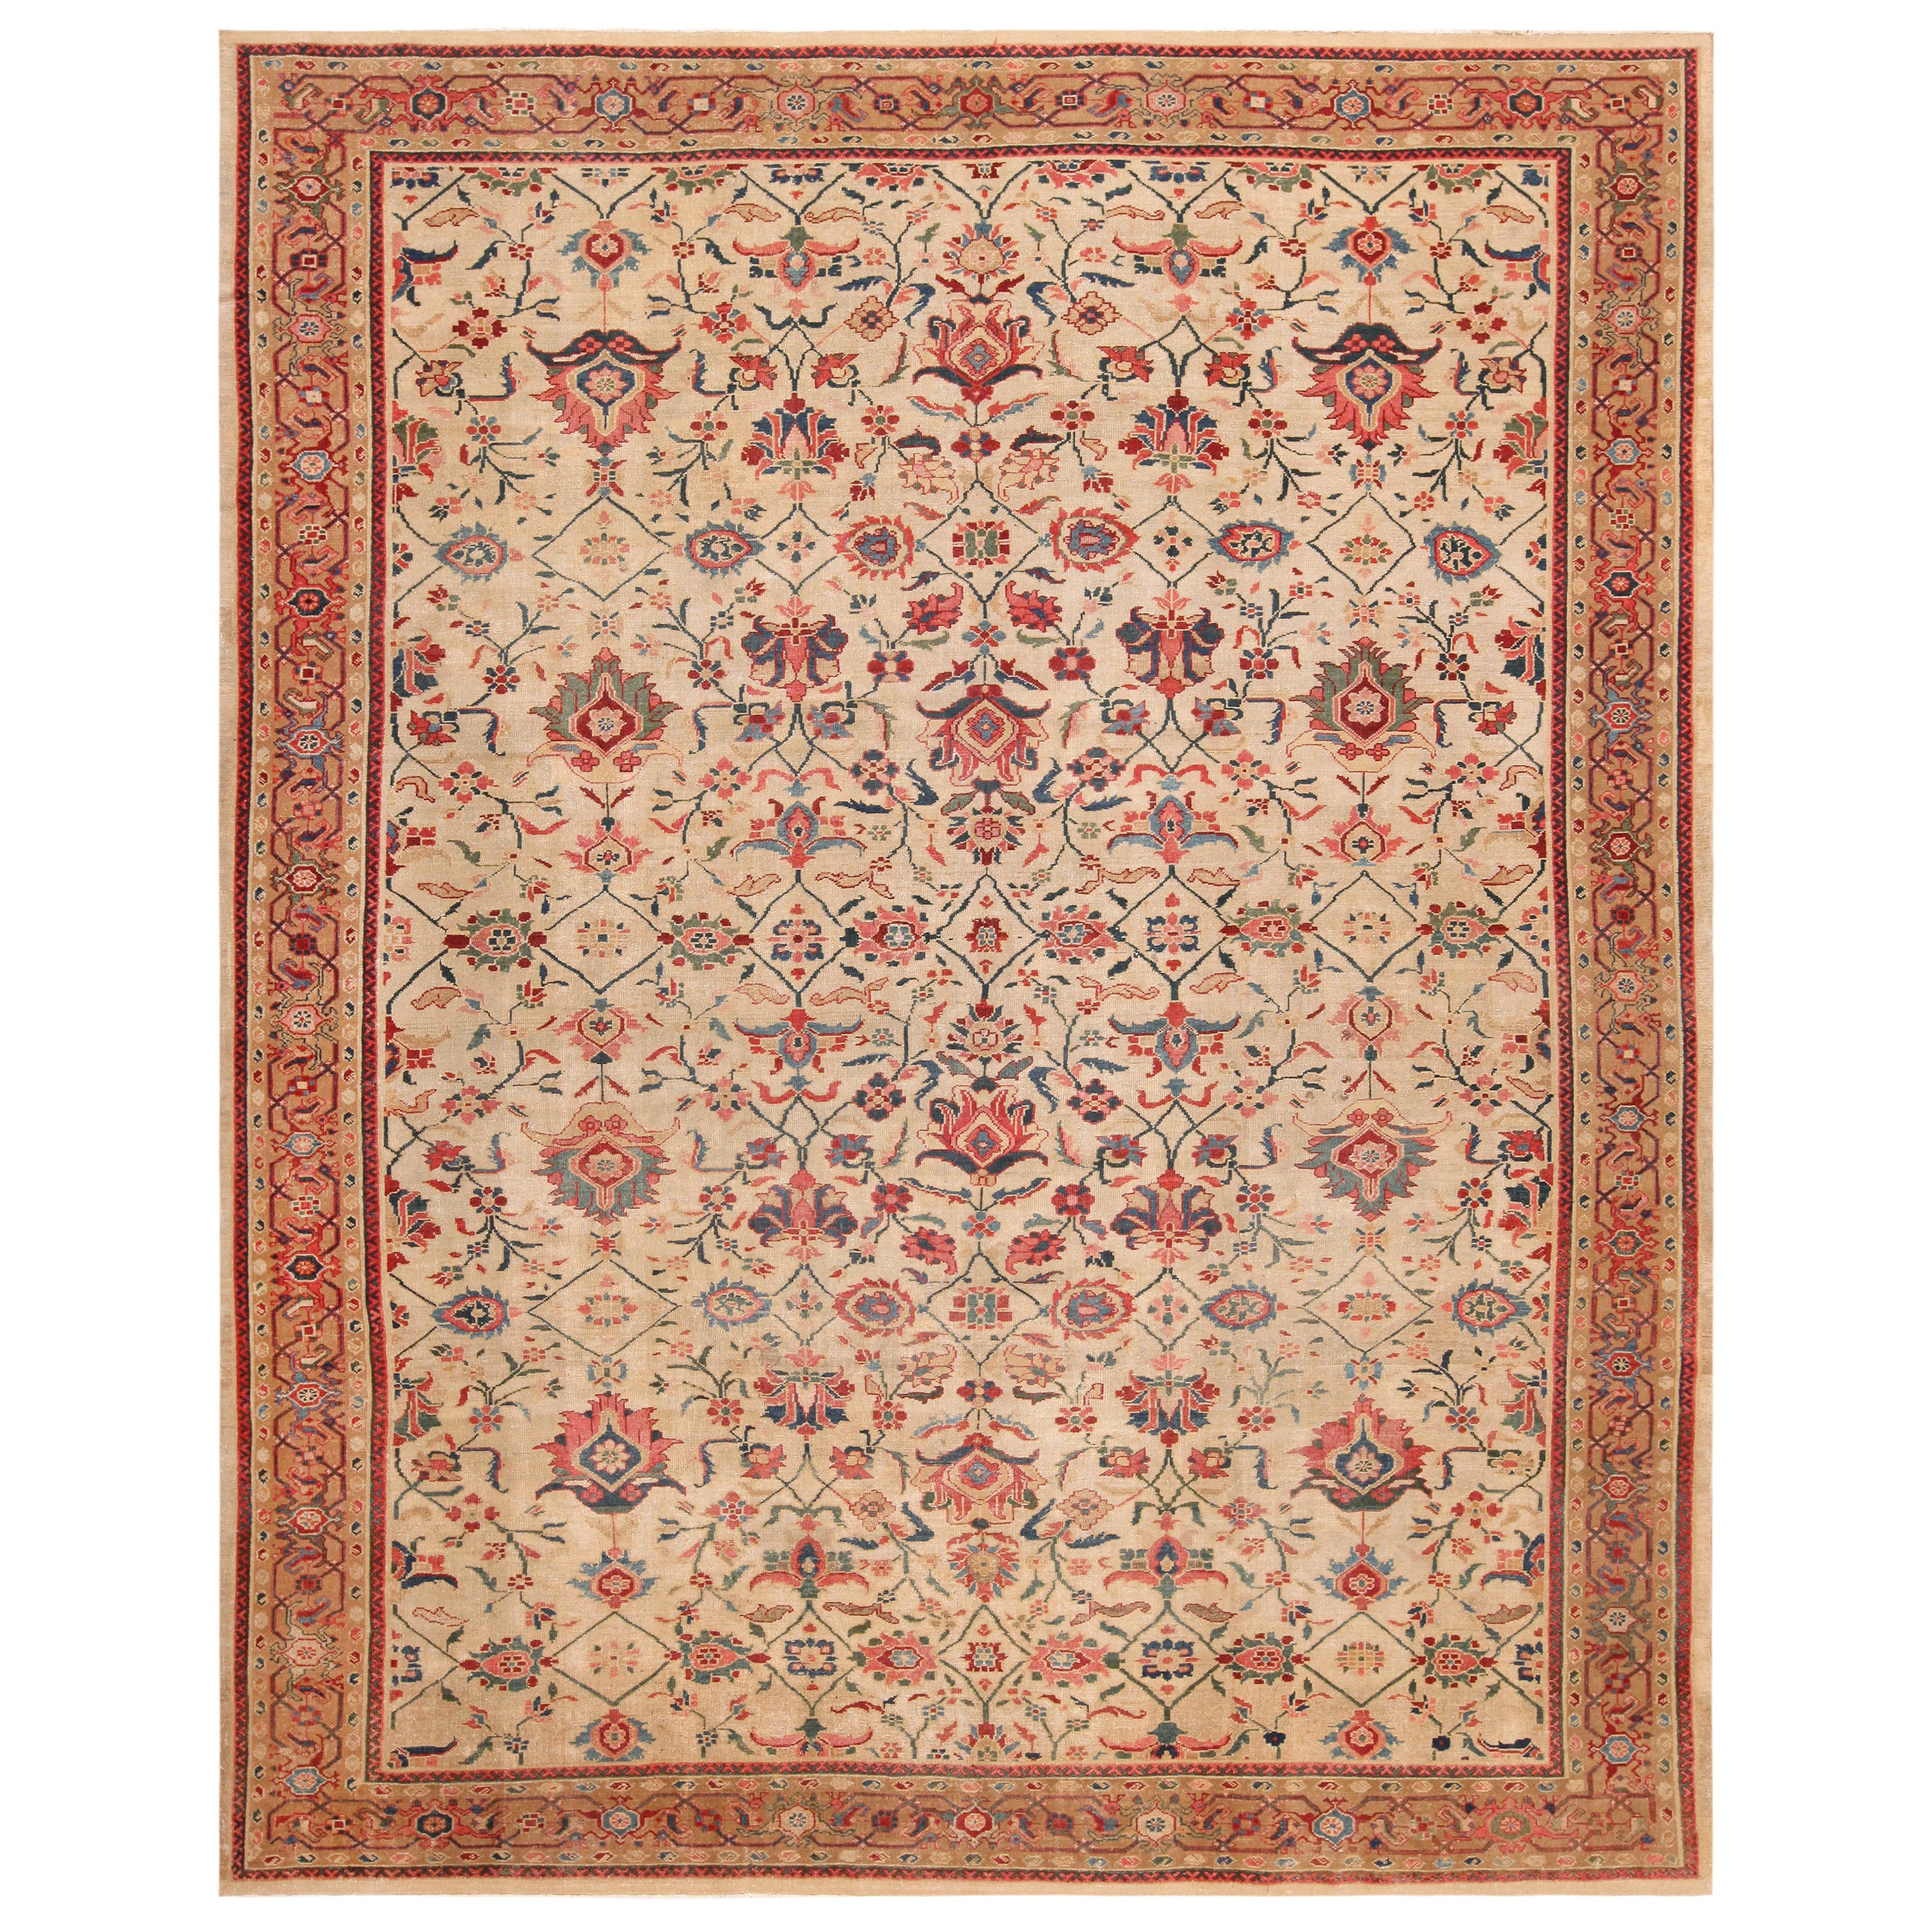 Antique Persian Sultanabad Rug. 9 ft 3 in x 11 ft 3 in